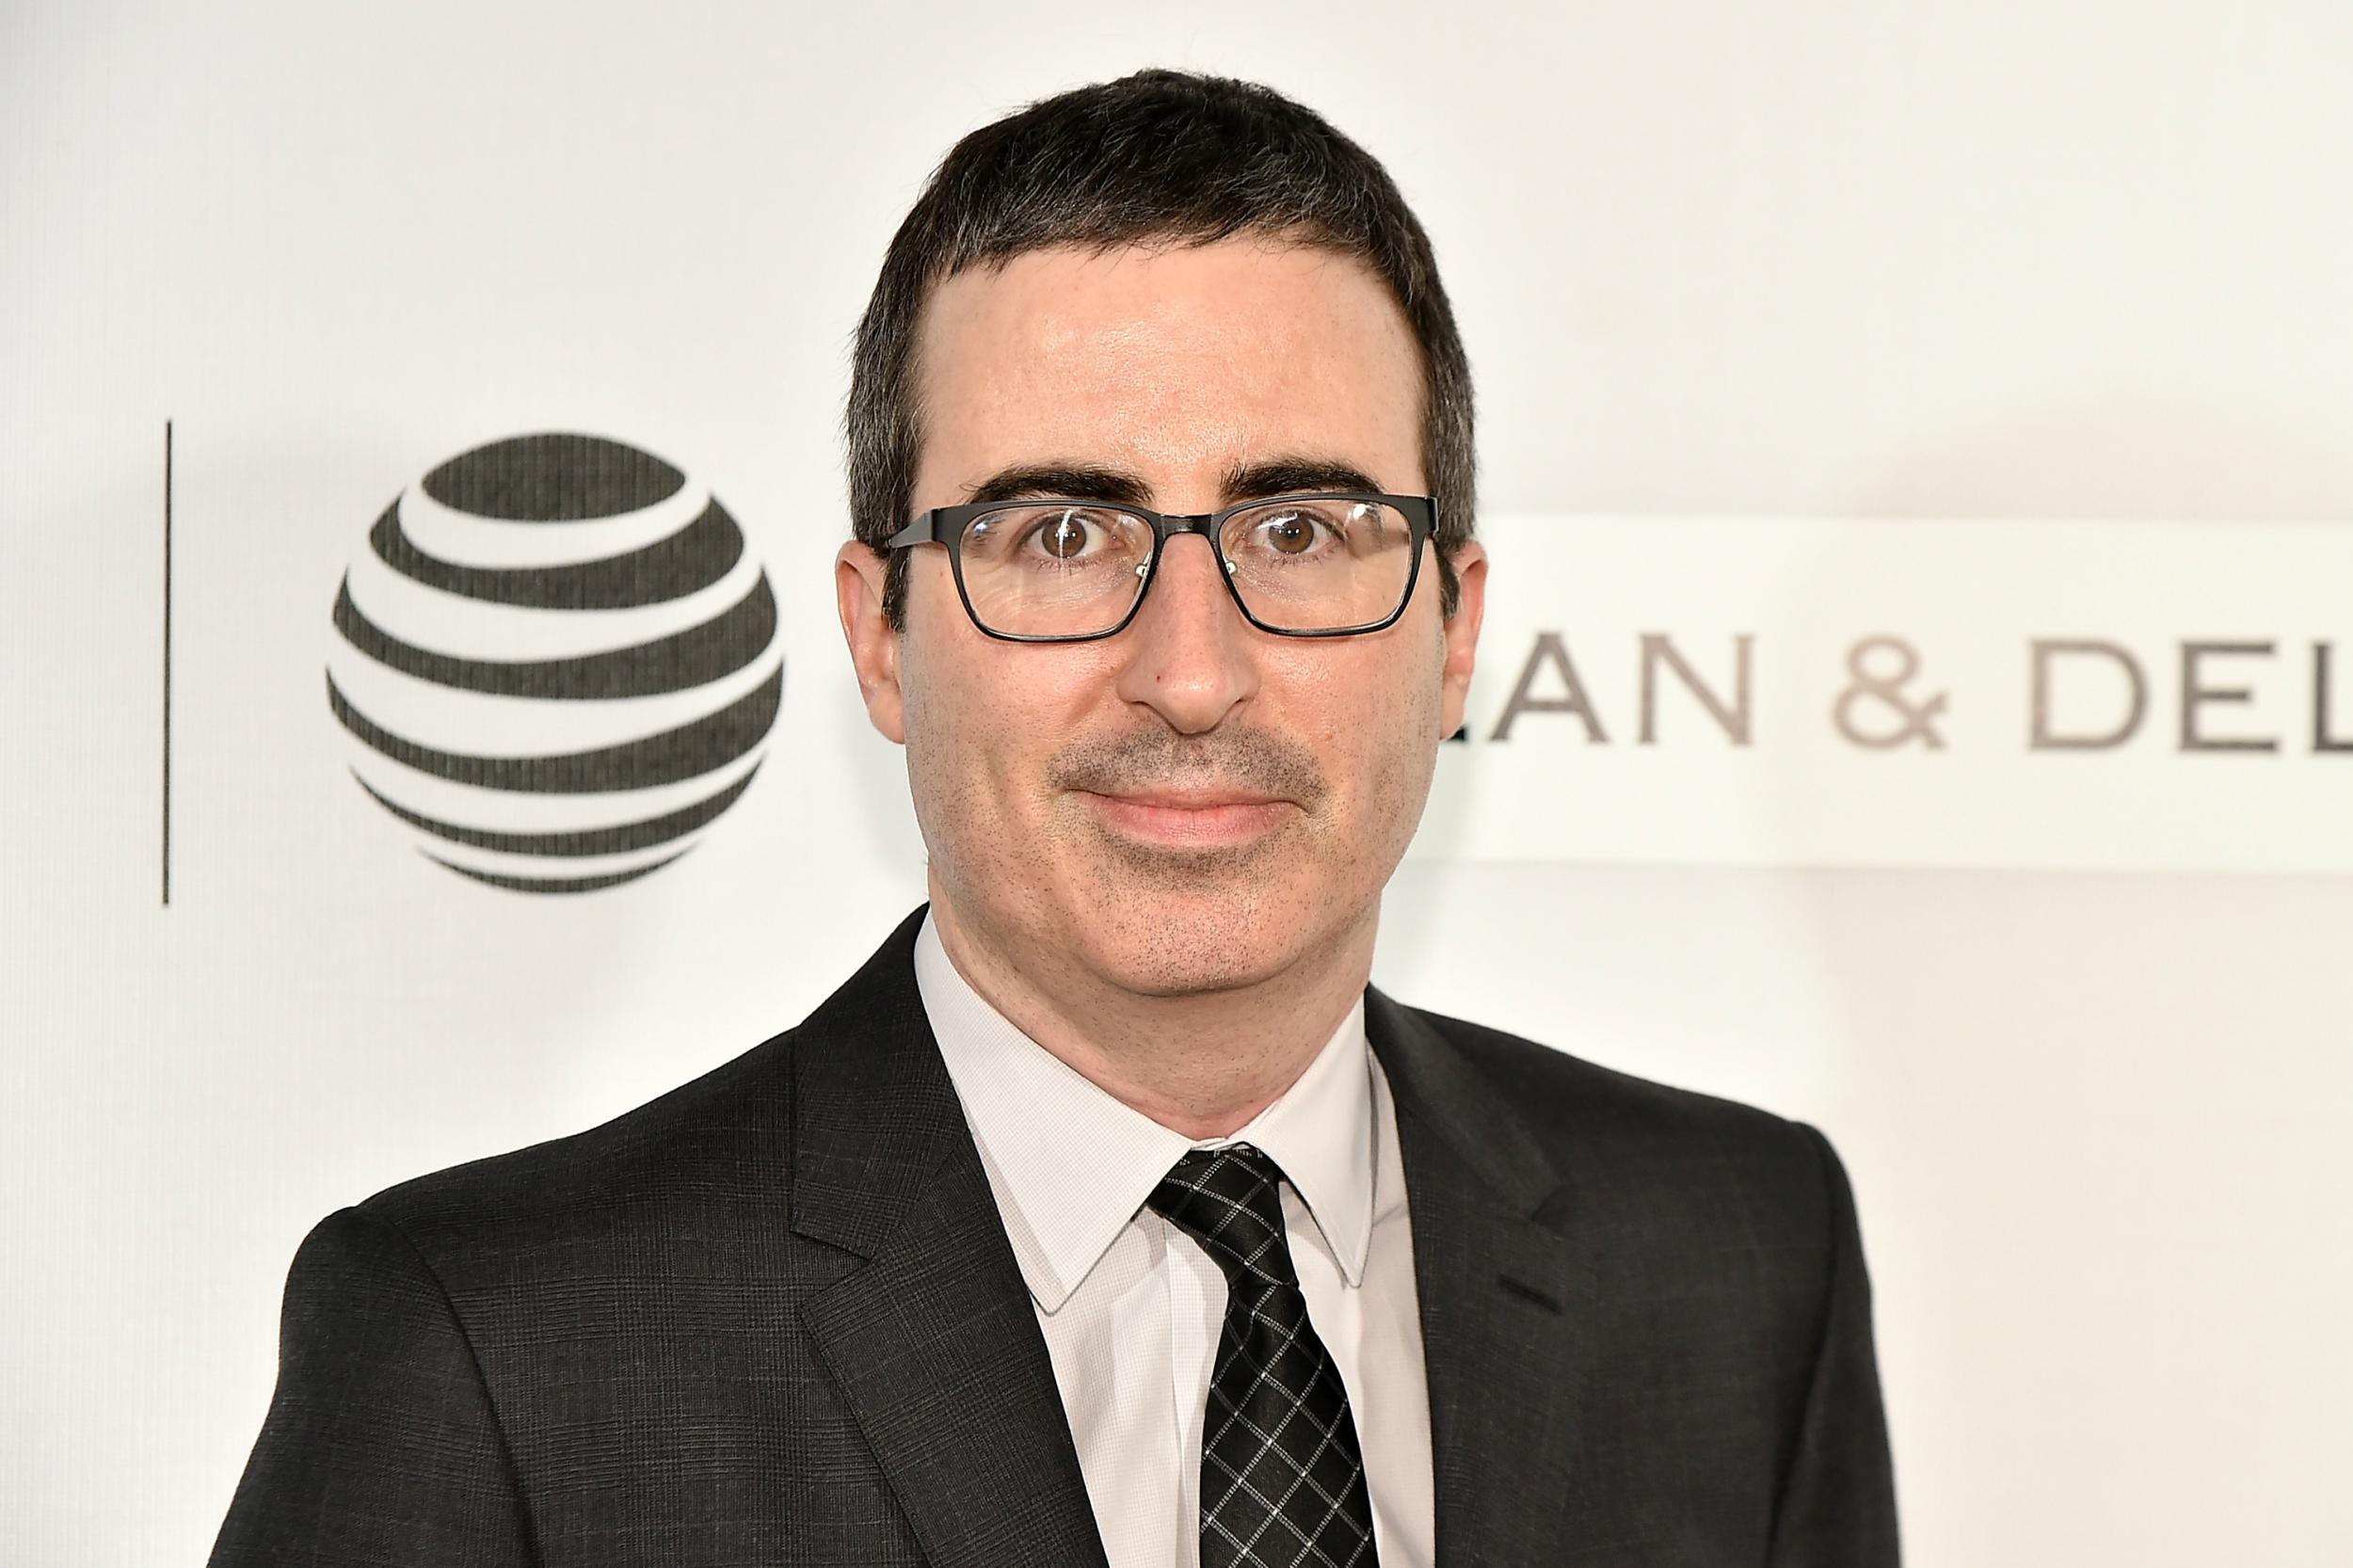 John Oliver explains why he confronted Dustin Hoffman over sexual